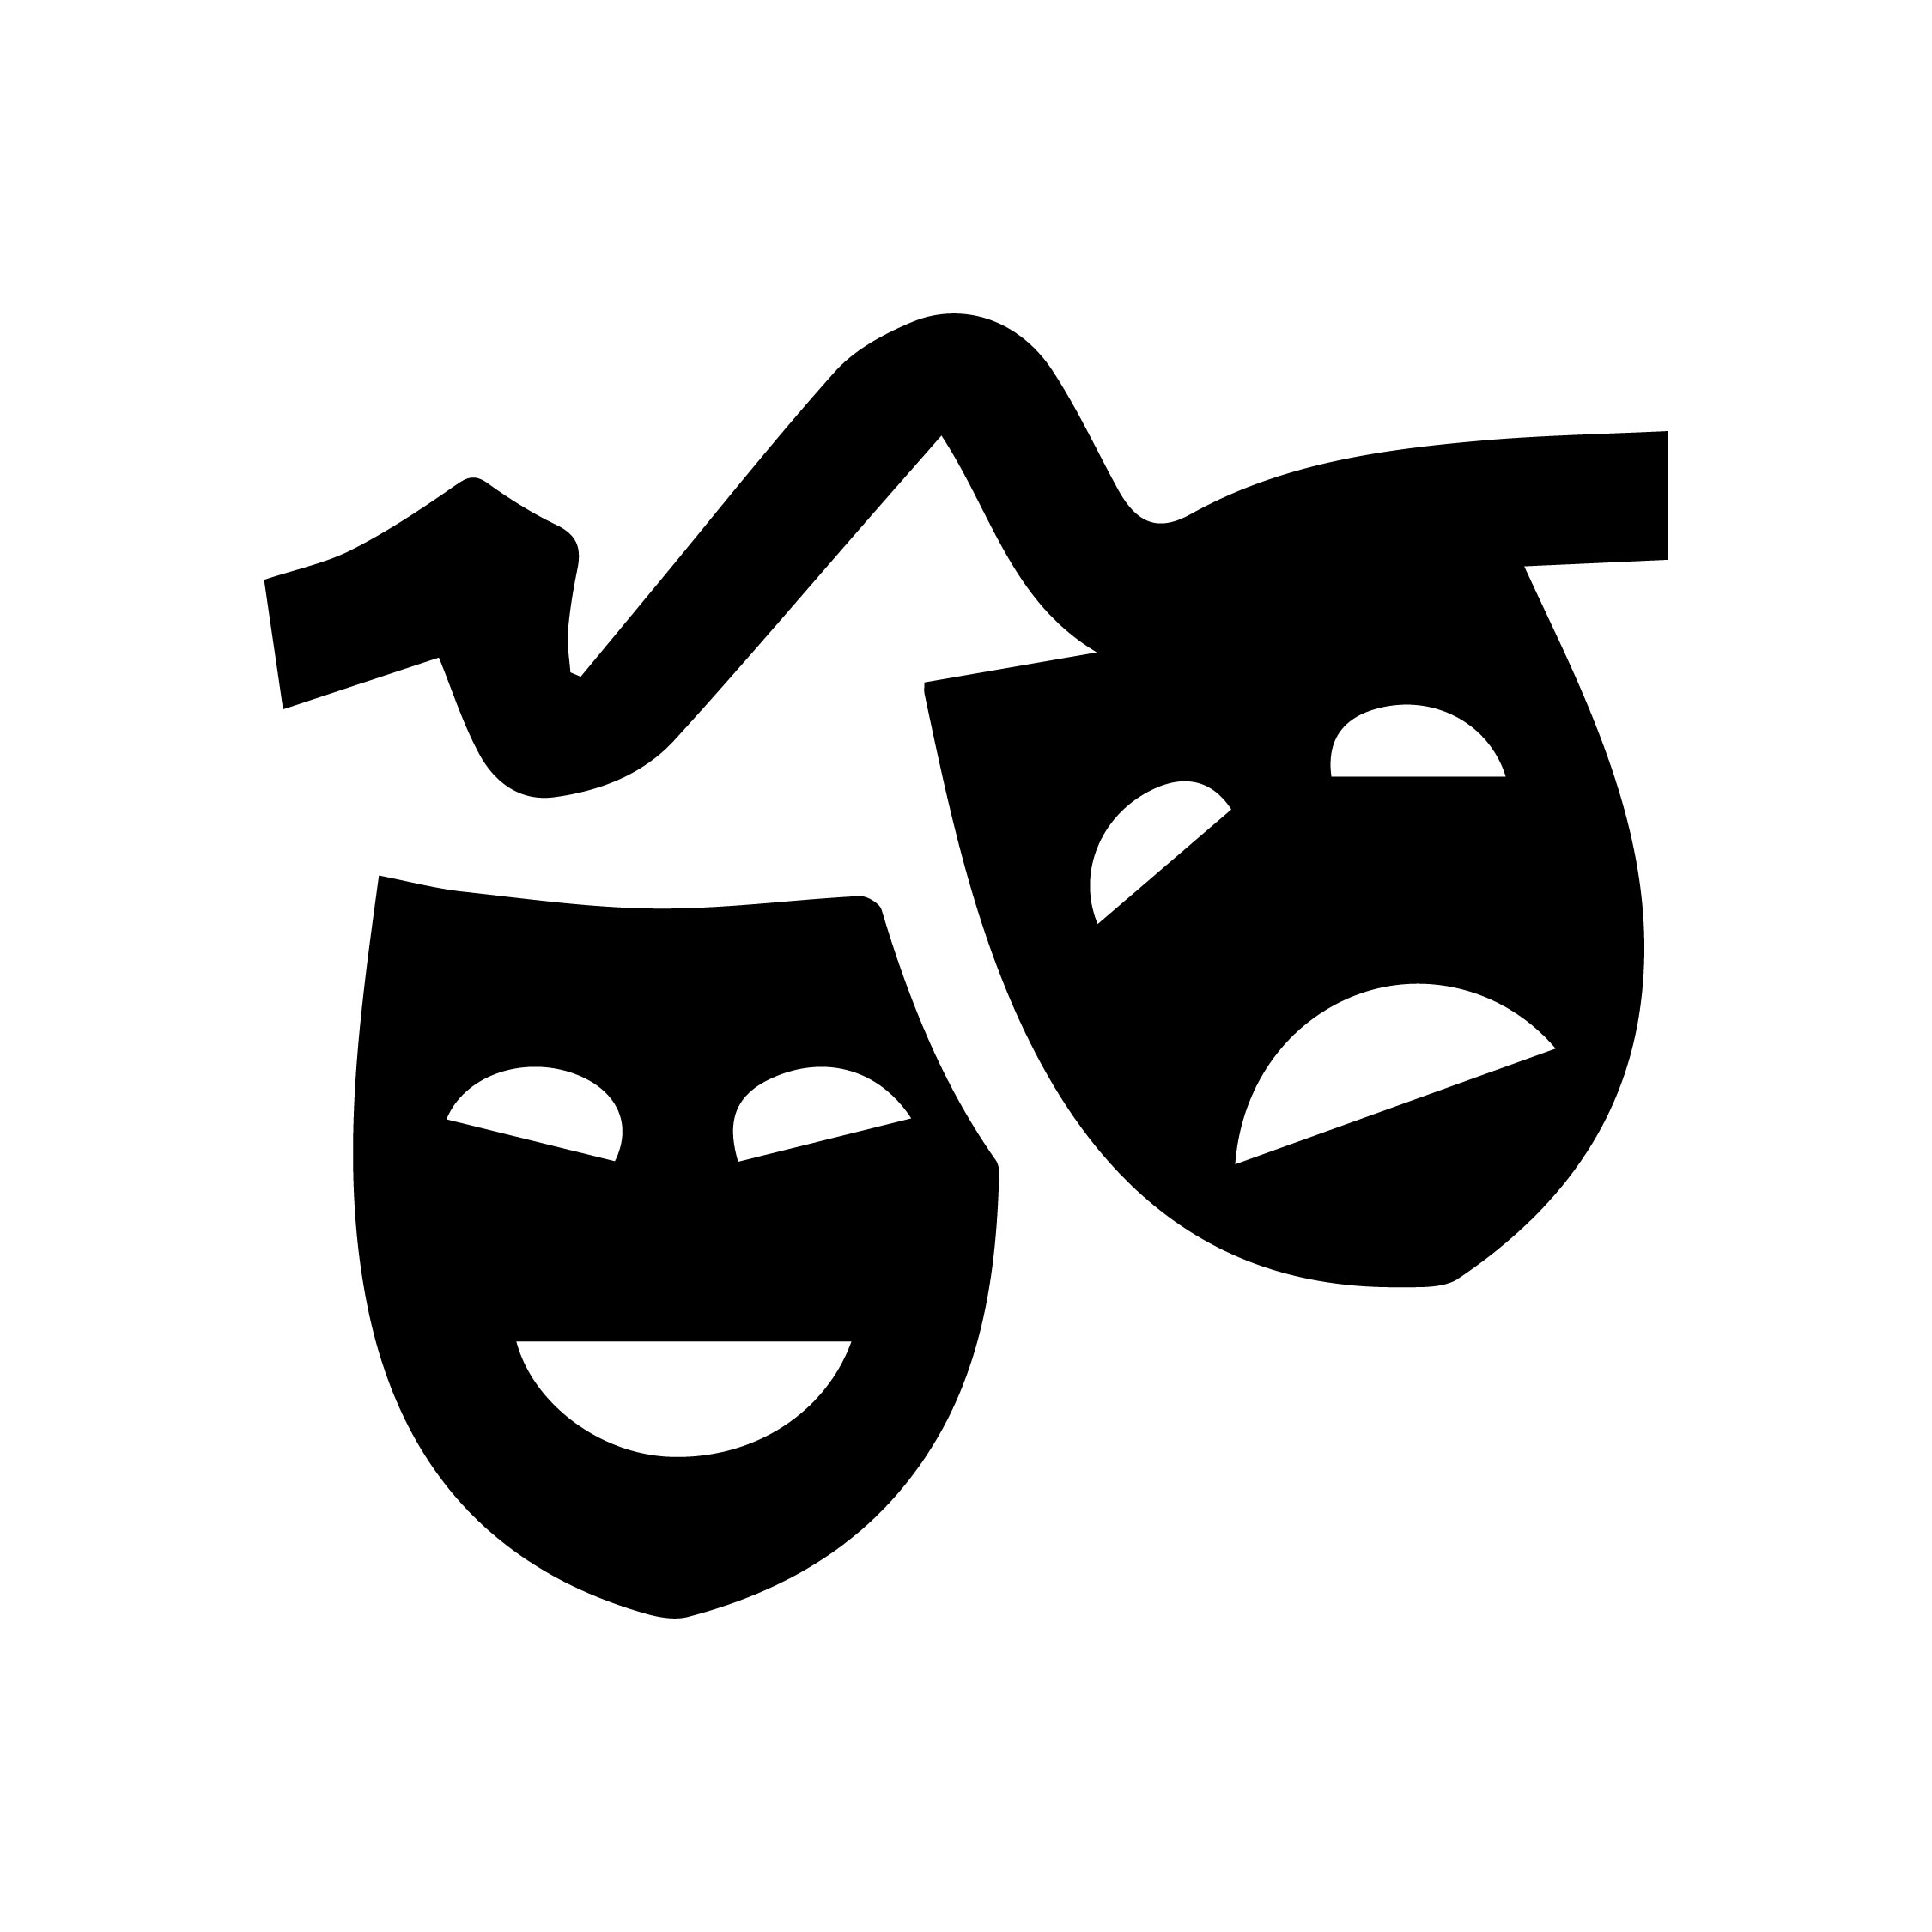 Couple of masks that are on top of each other.